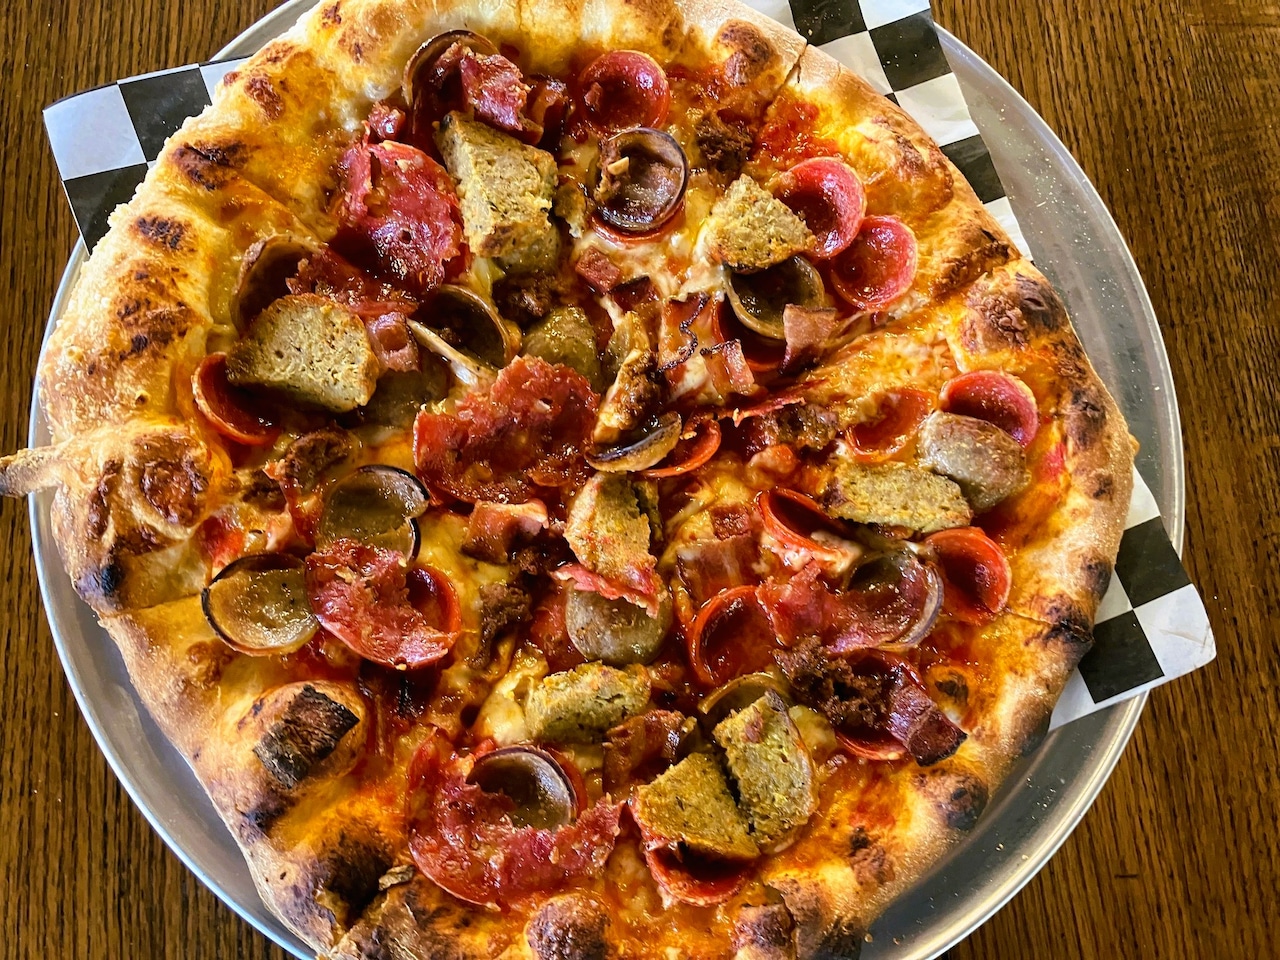 An Alabama pizzeria made this U.S. top 50: Did they pick the right one? [Video]